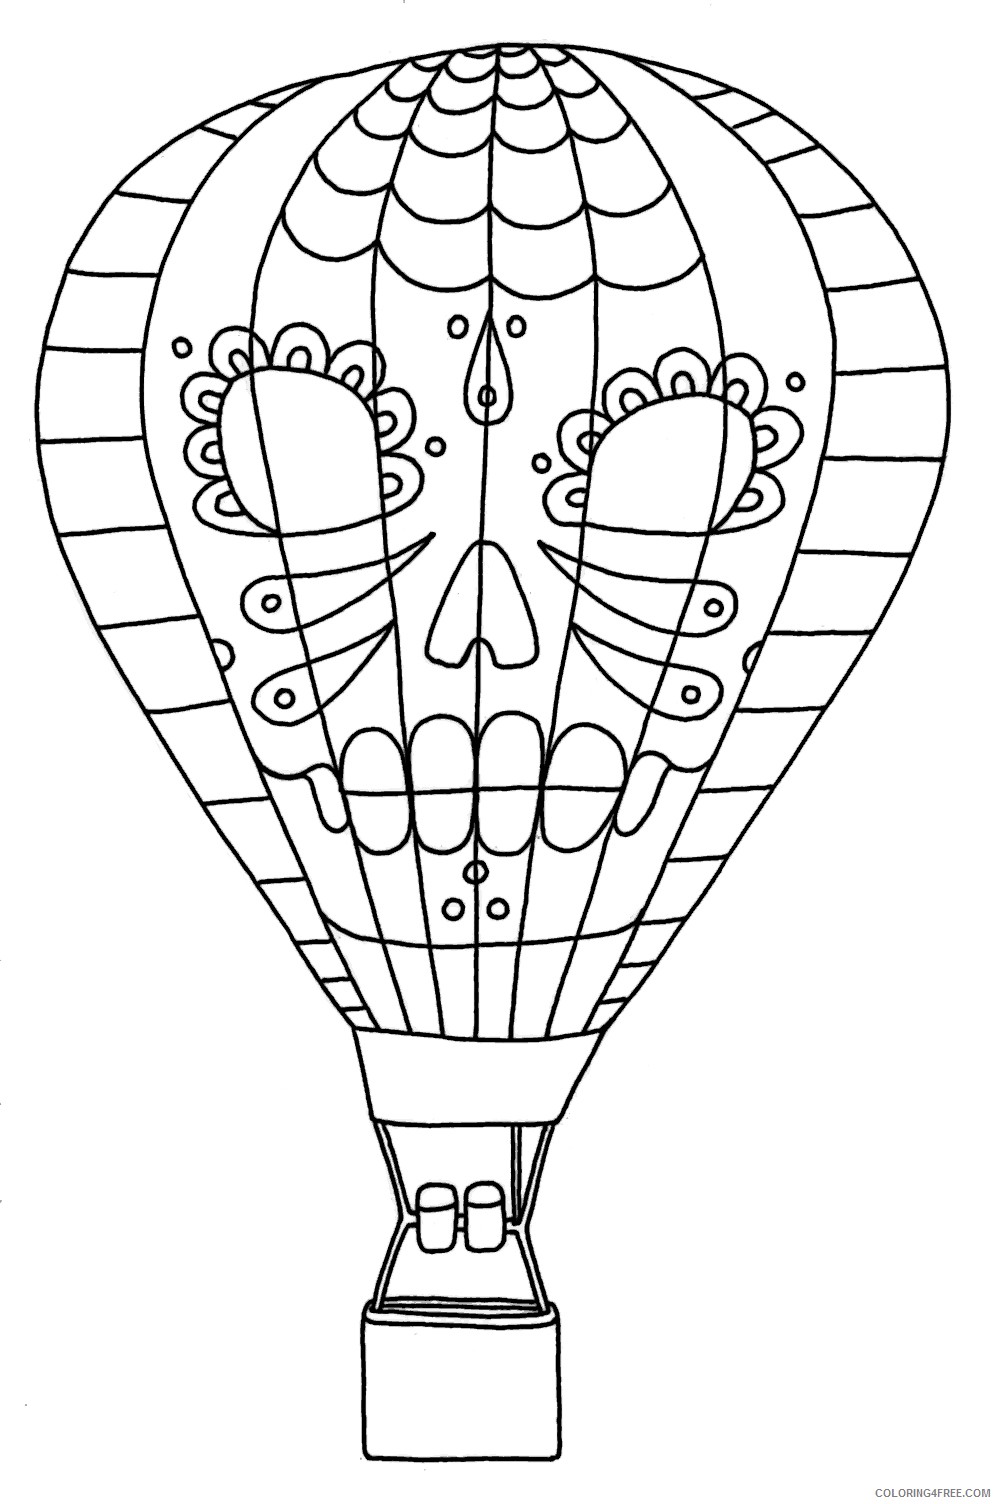 hot air balloon coloring pages with sugar skull images Coloring4free